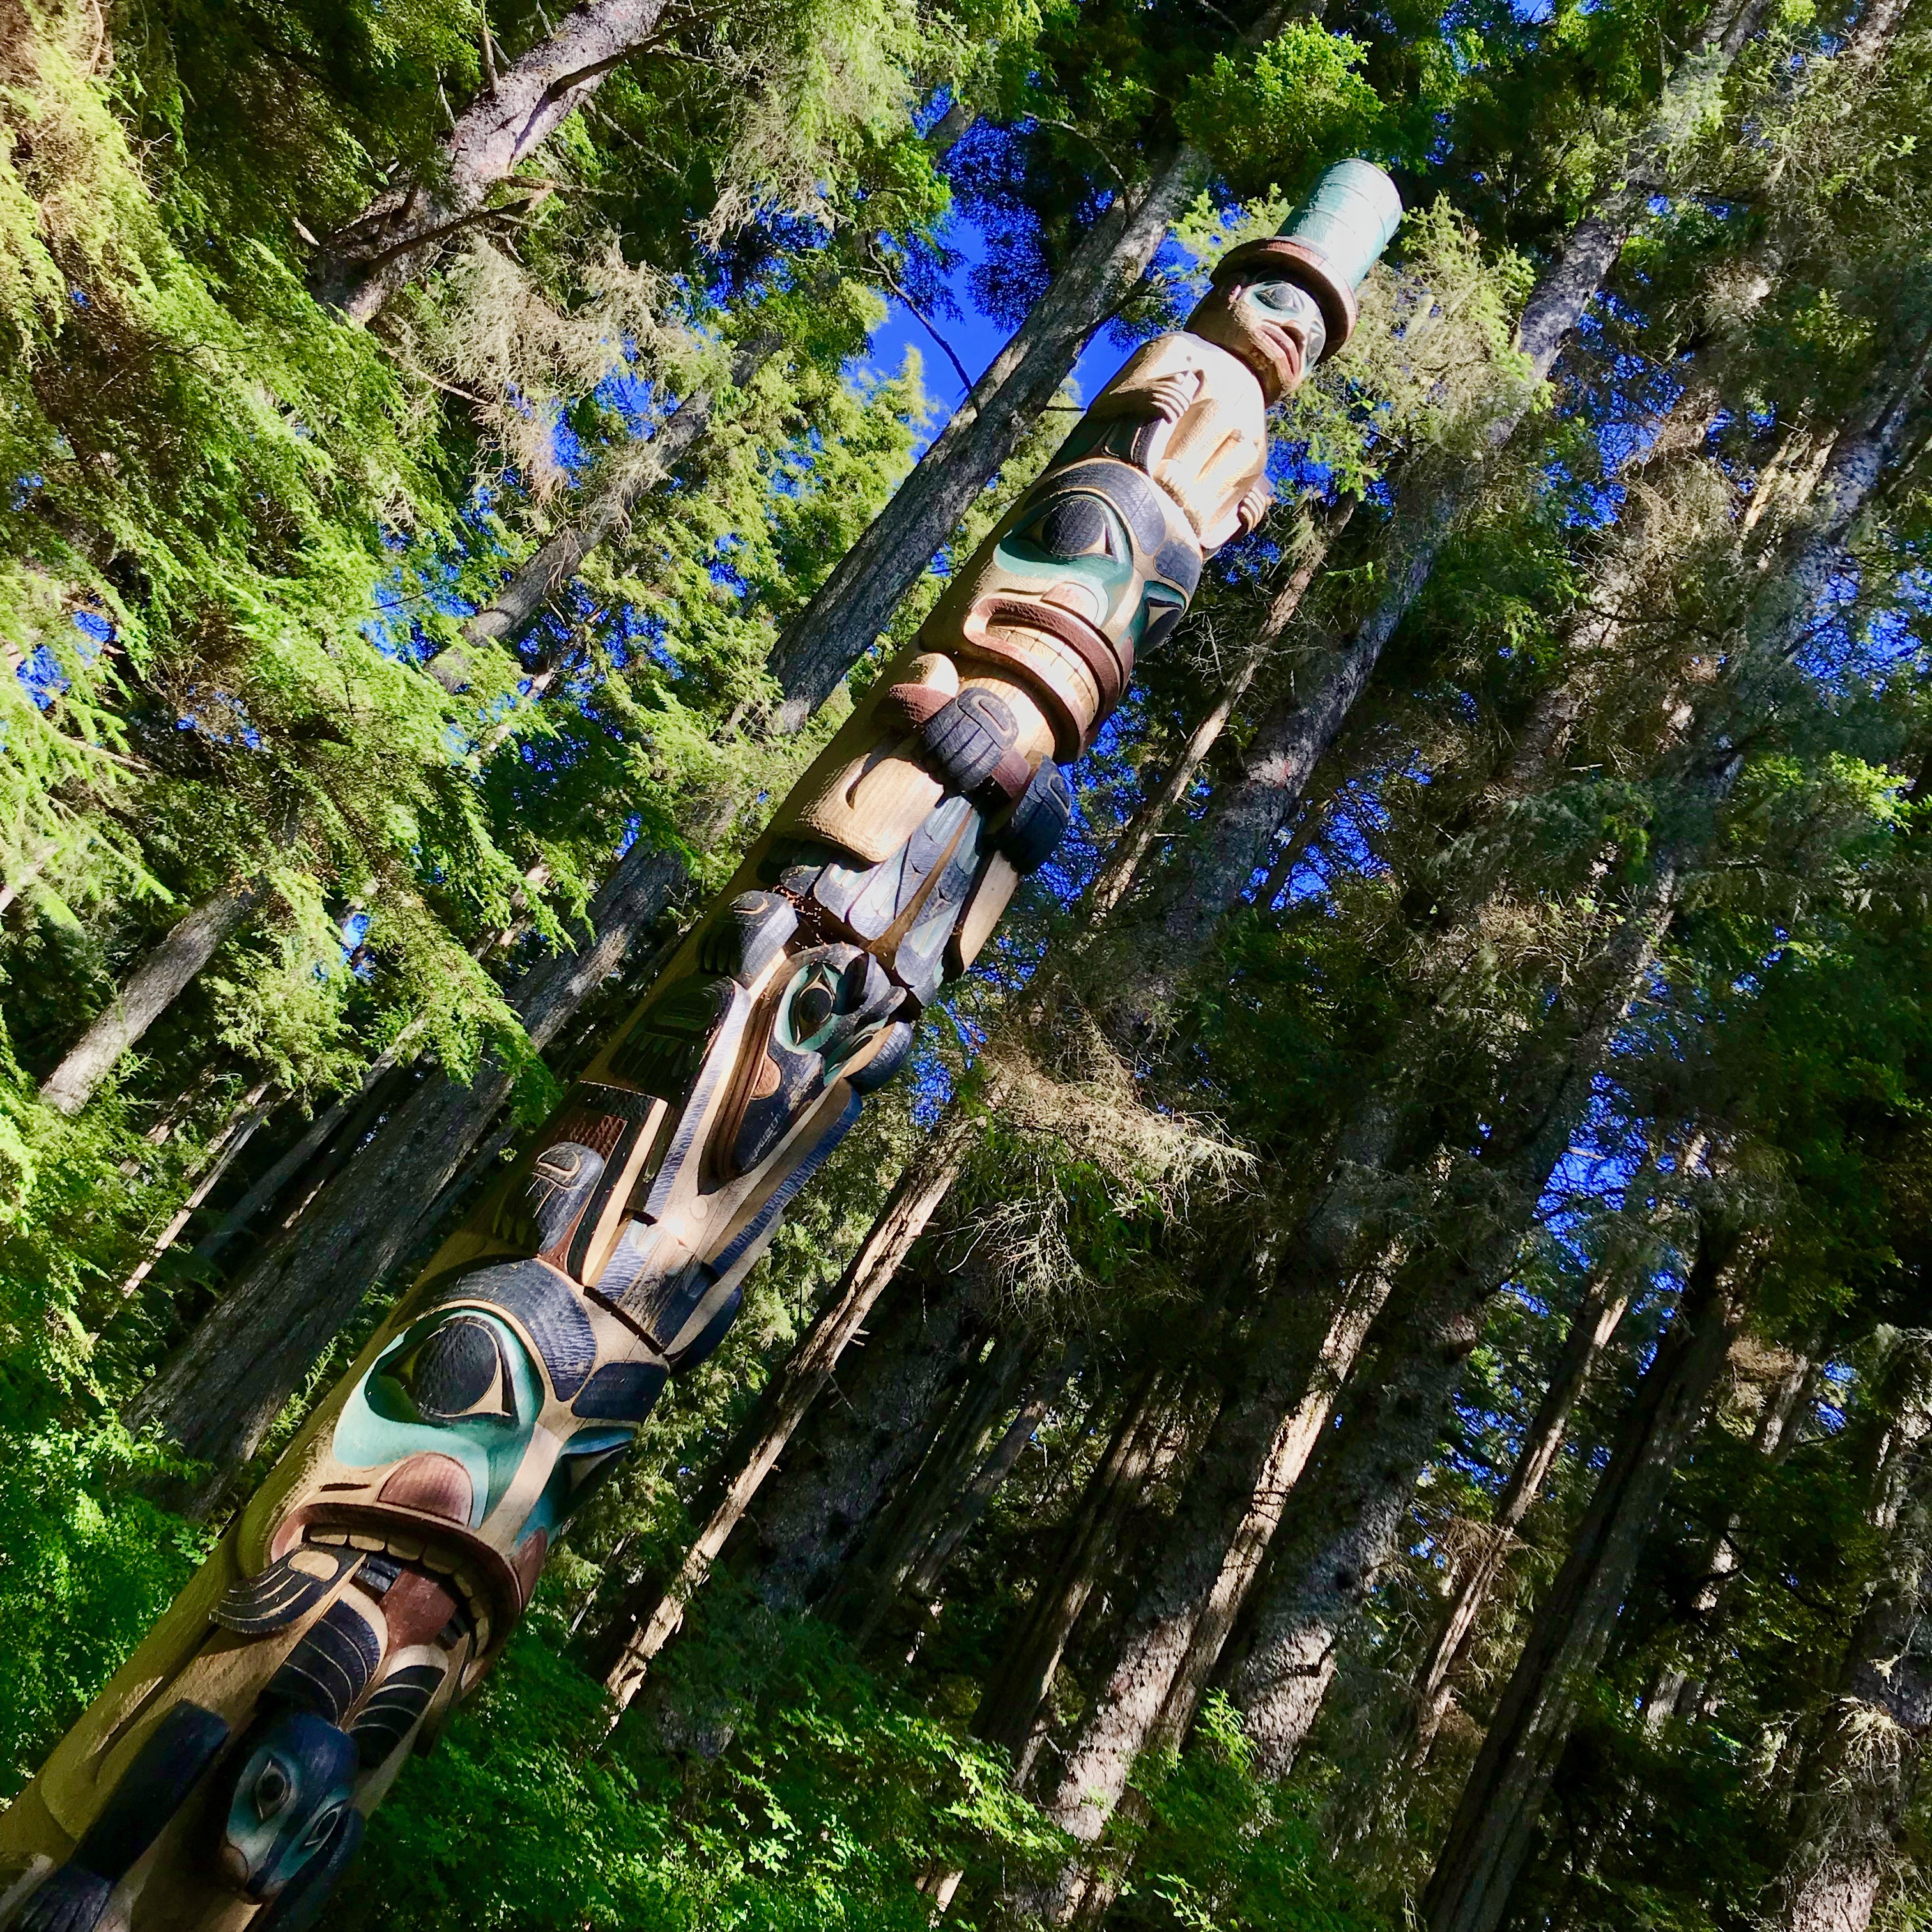 As if hiding deep in the green, the totem poles slowly appear along the forest walk, telling their particular story to the world.  Sitka, Alaska.